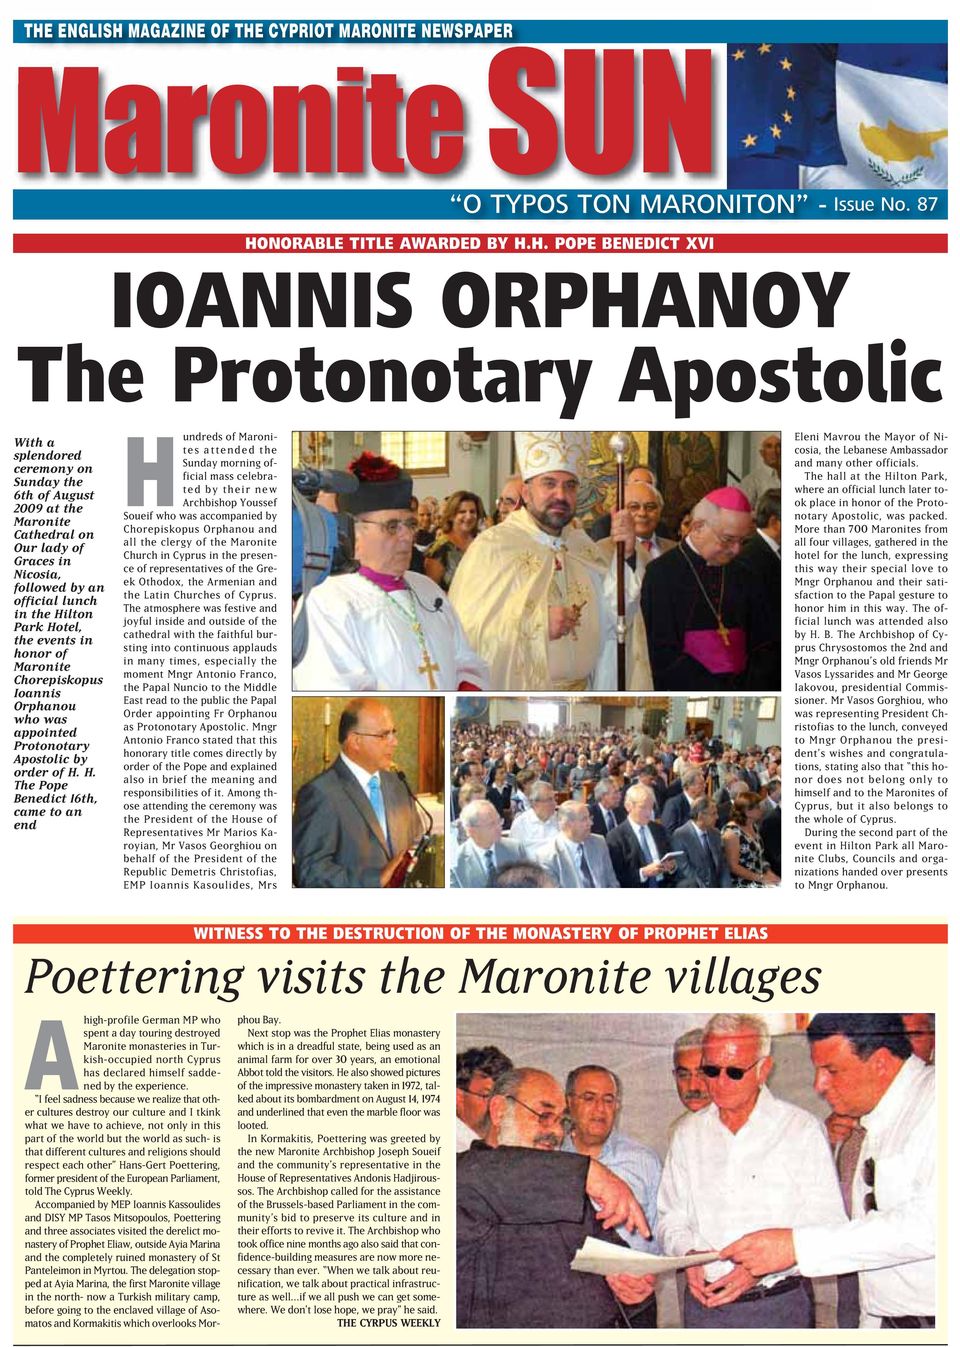 Maronite Chorepiskops Ioannis Orphano who was appointed Protonotary Apostolic by order of H.